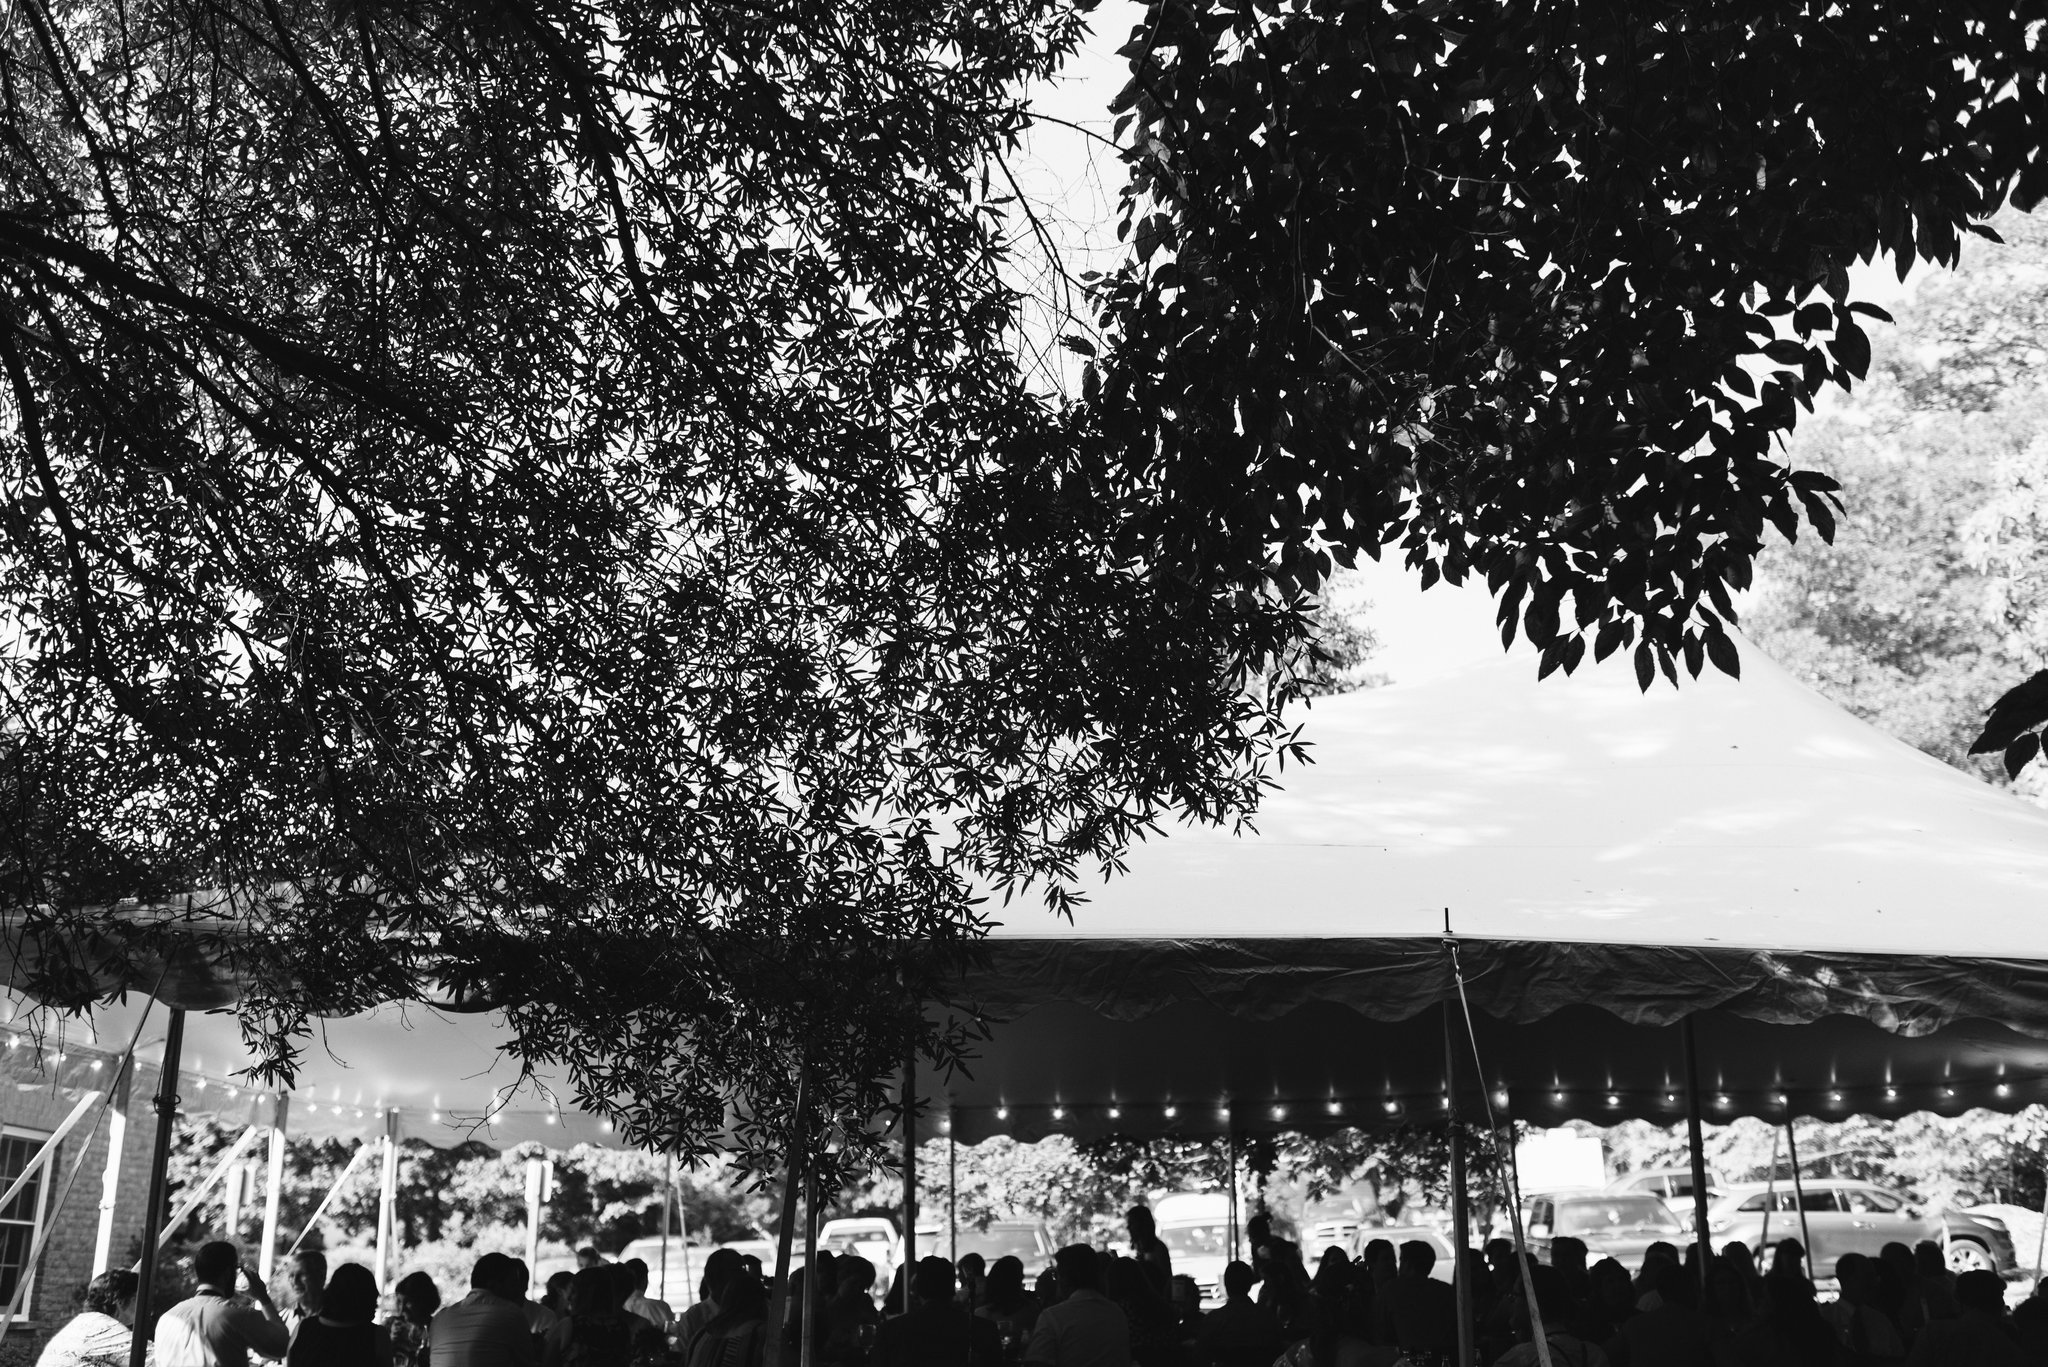  Annapolis, Quaker Wedding, Maryland Wedding Photographer, Intimate, Small Wedding, Vintage, DIY, Wedding Guests Under Tent, Outdoor Reception, Black and White Photo 